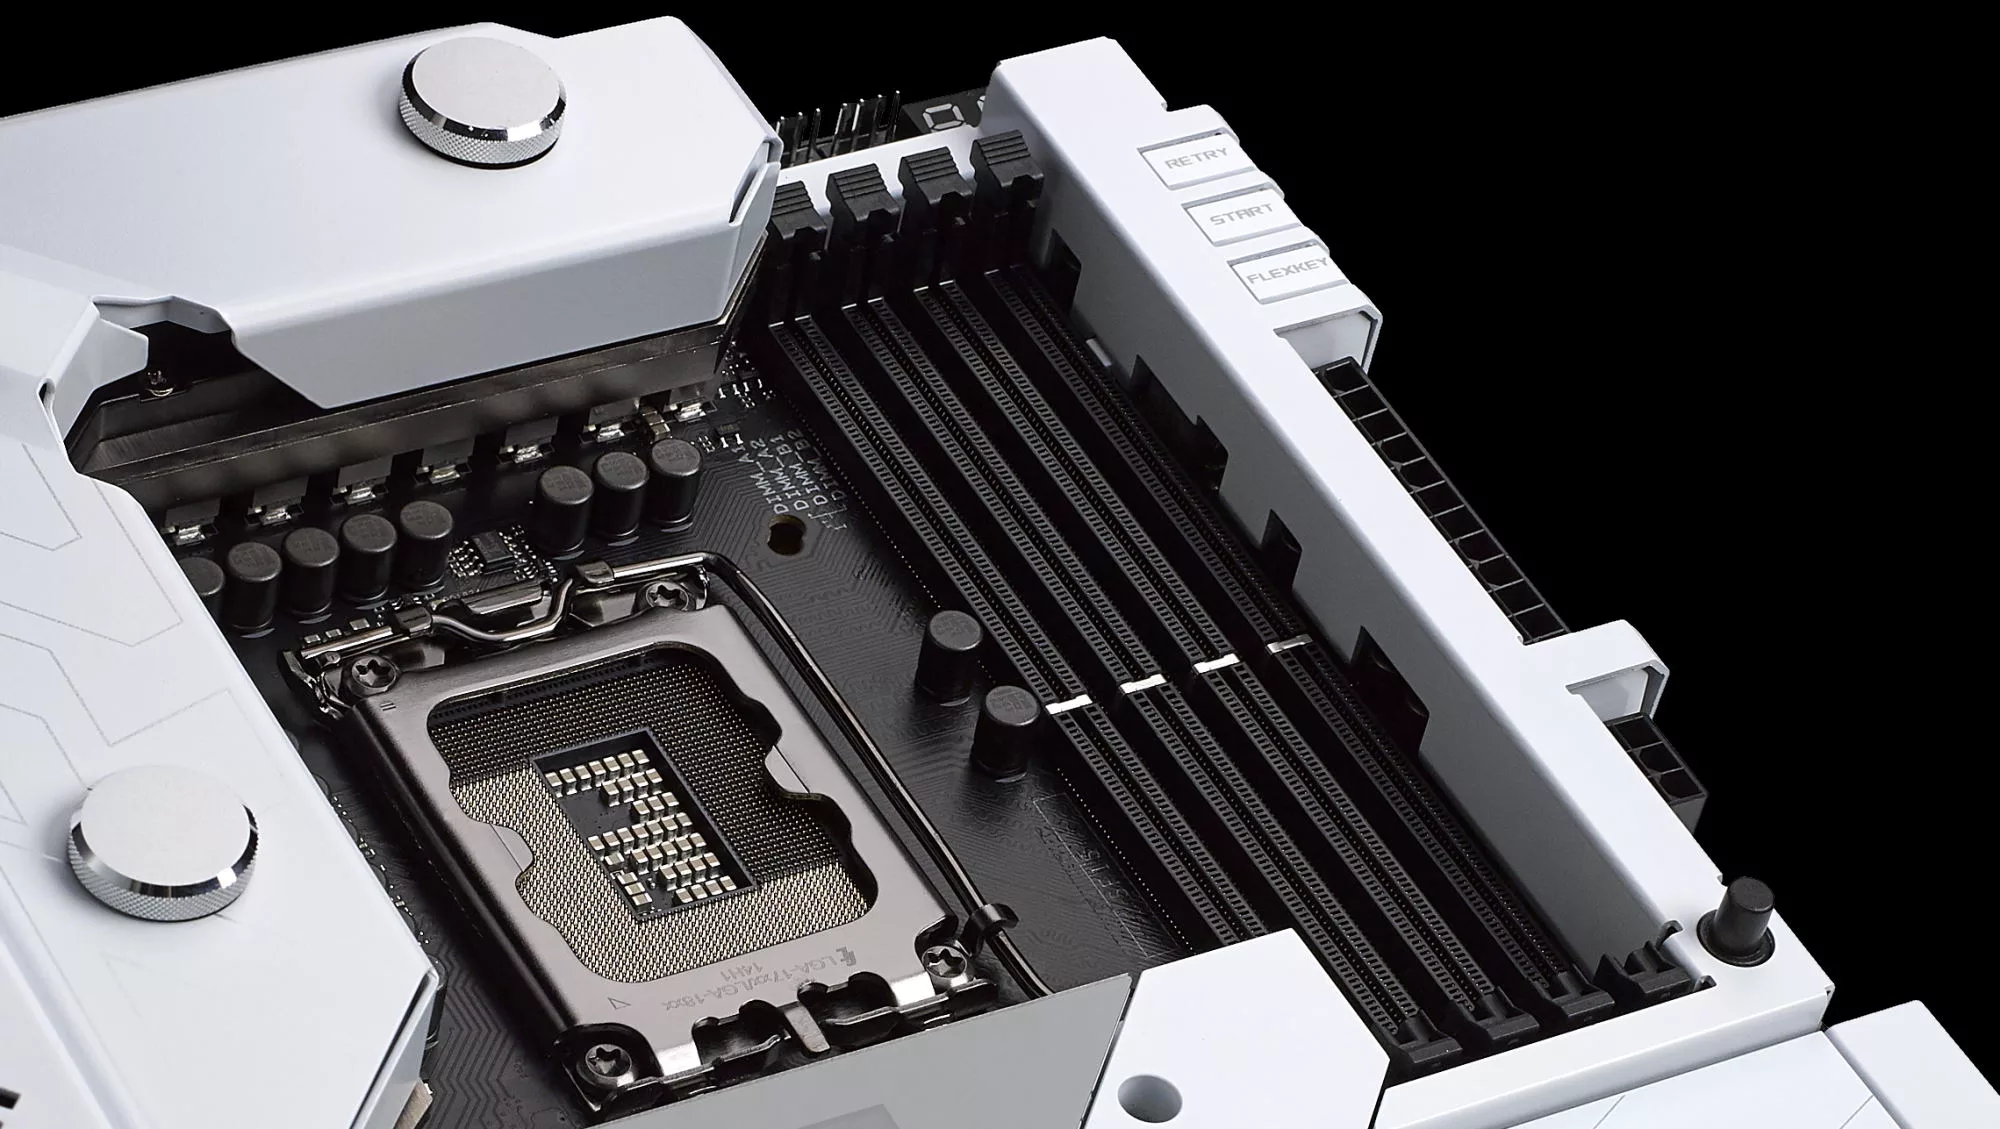 The ROG Maximus Z690 Formula motherboard with the open CPU socket, RAM slots, and water cooled VRM heatsink visible.